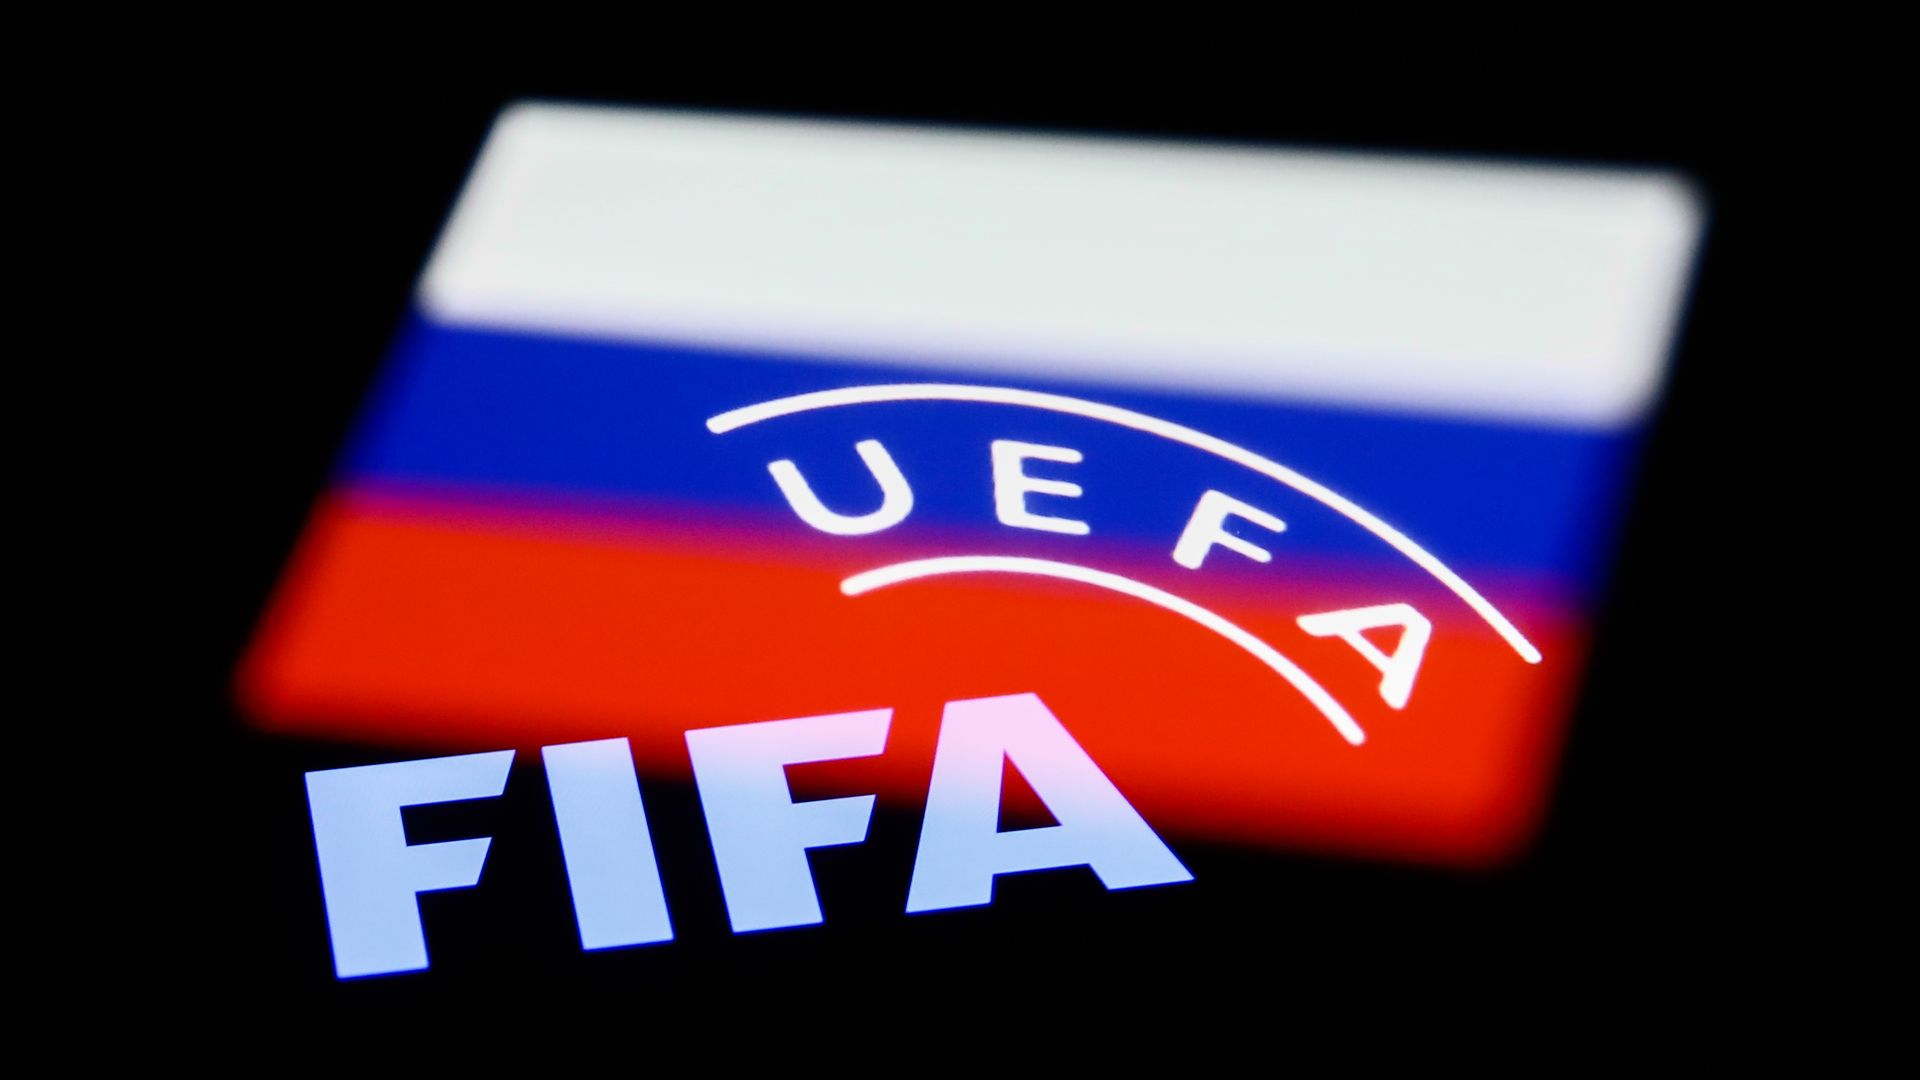 Russian flag and the uefa and fifa logos